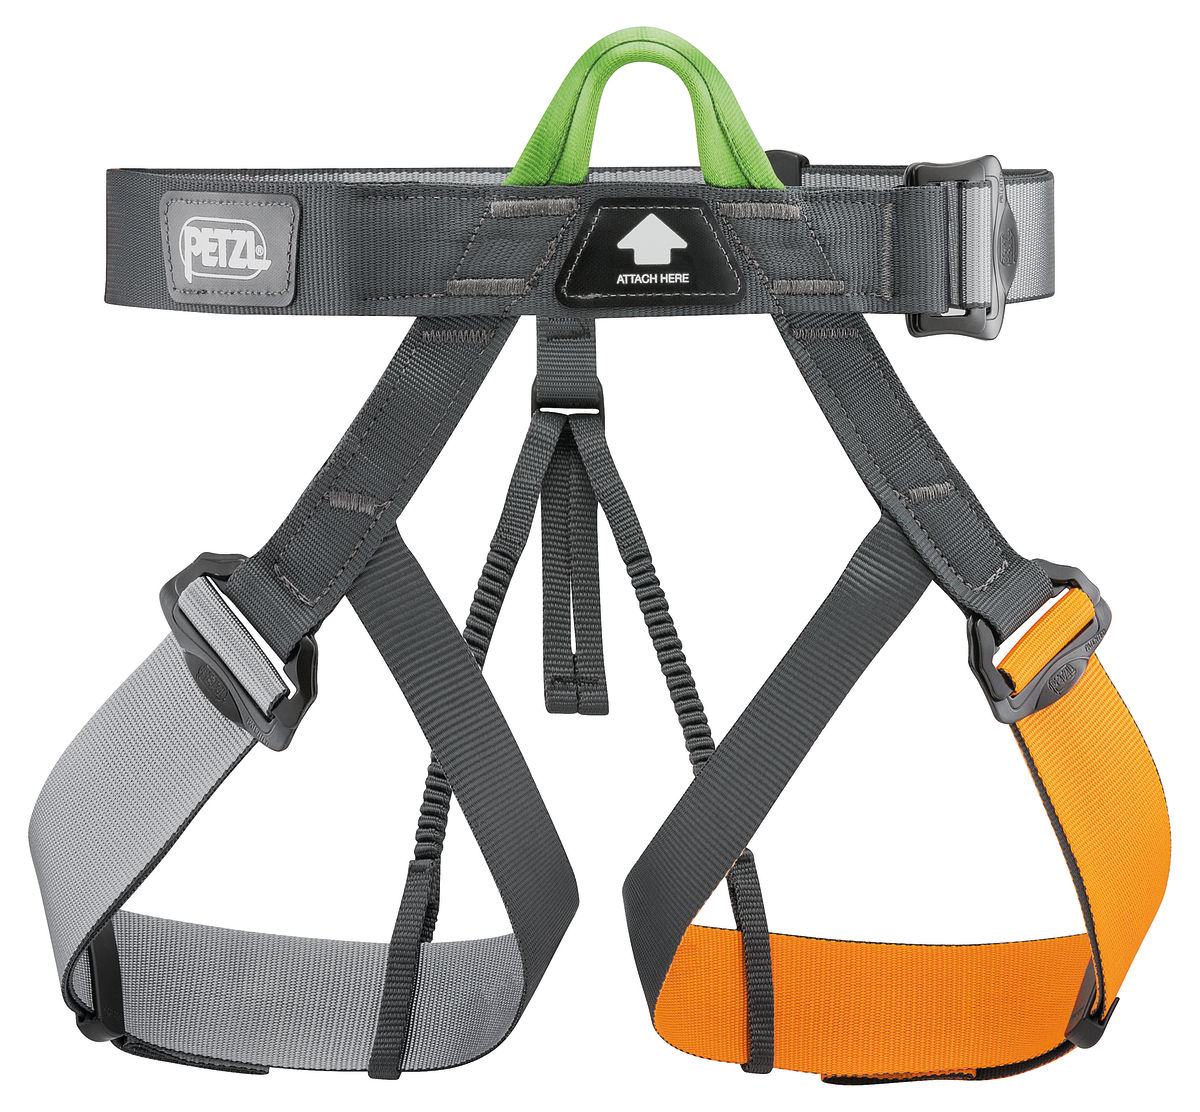 CORAX, Comfortable and fully adjustable harness for gym and outdoor climbing  - Petzl USA